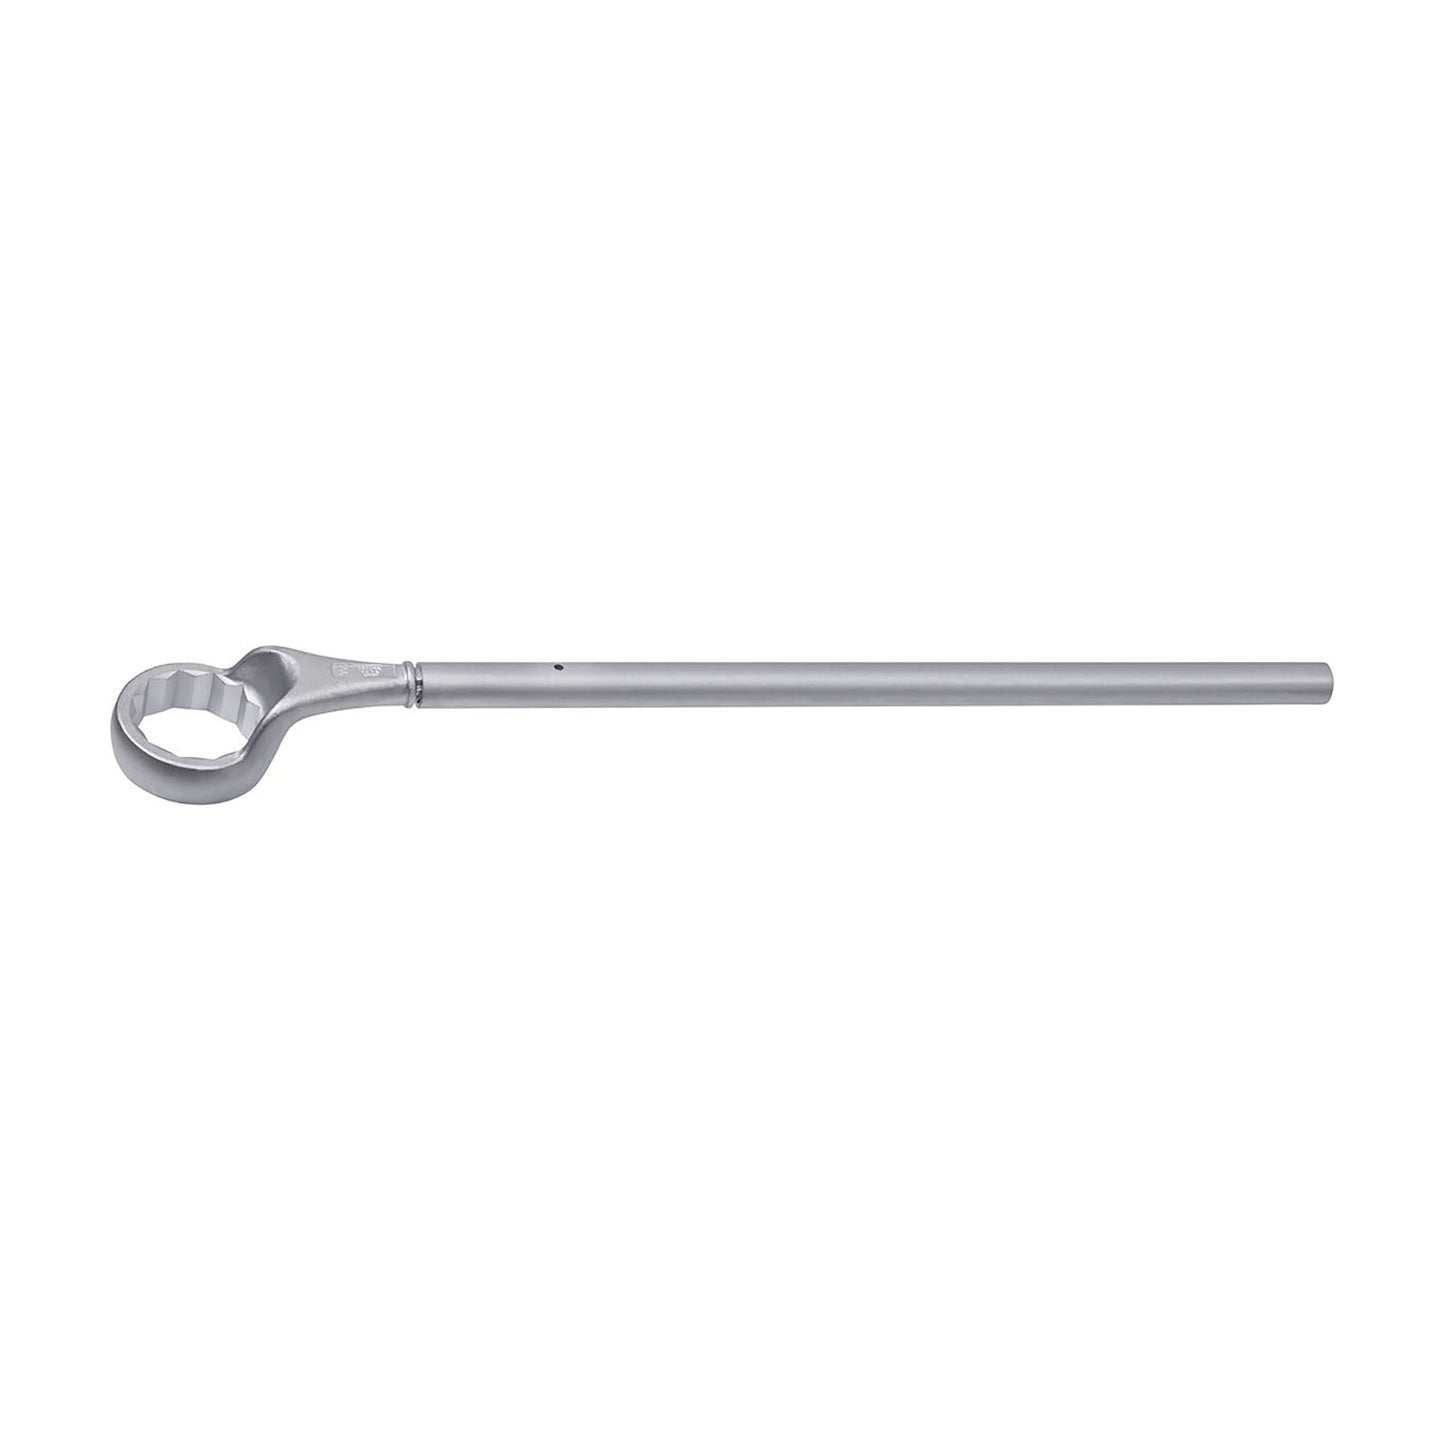 GEDORE 2 A 70 - Traction Wrench, 70mm (6035030)